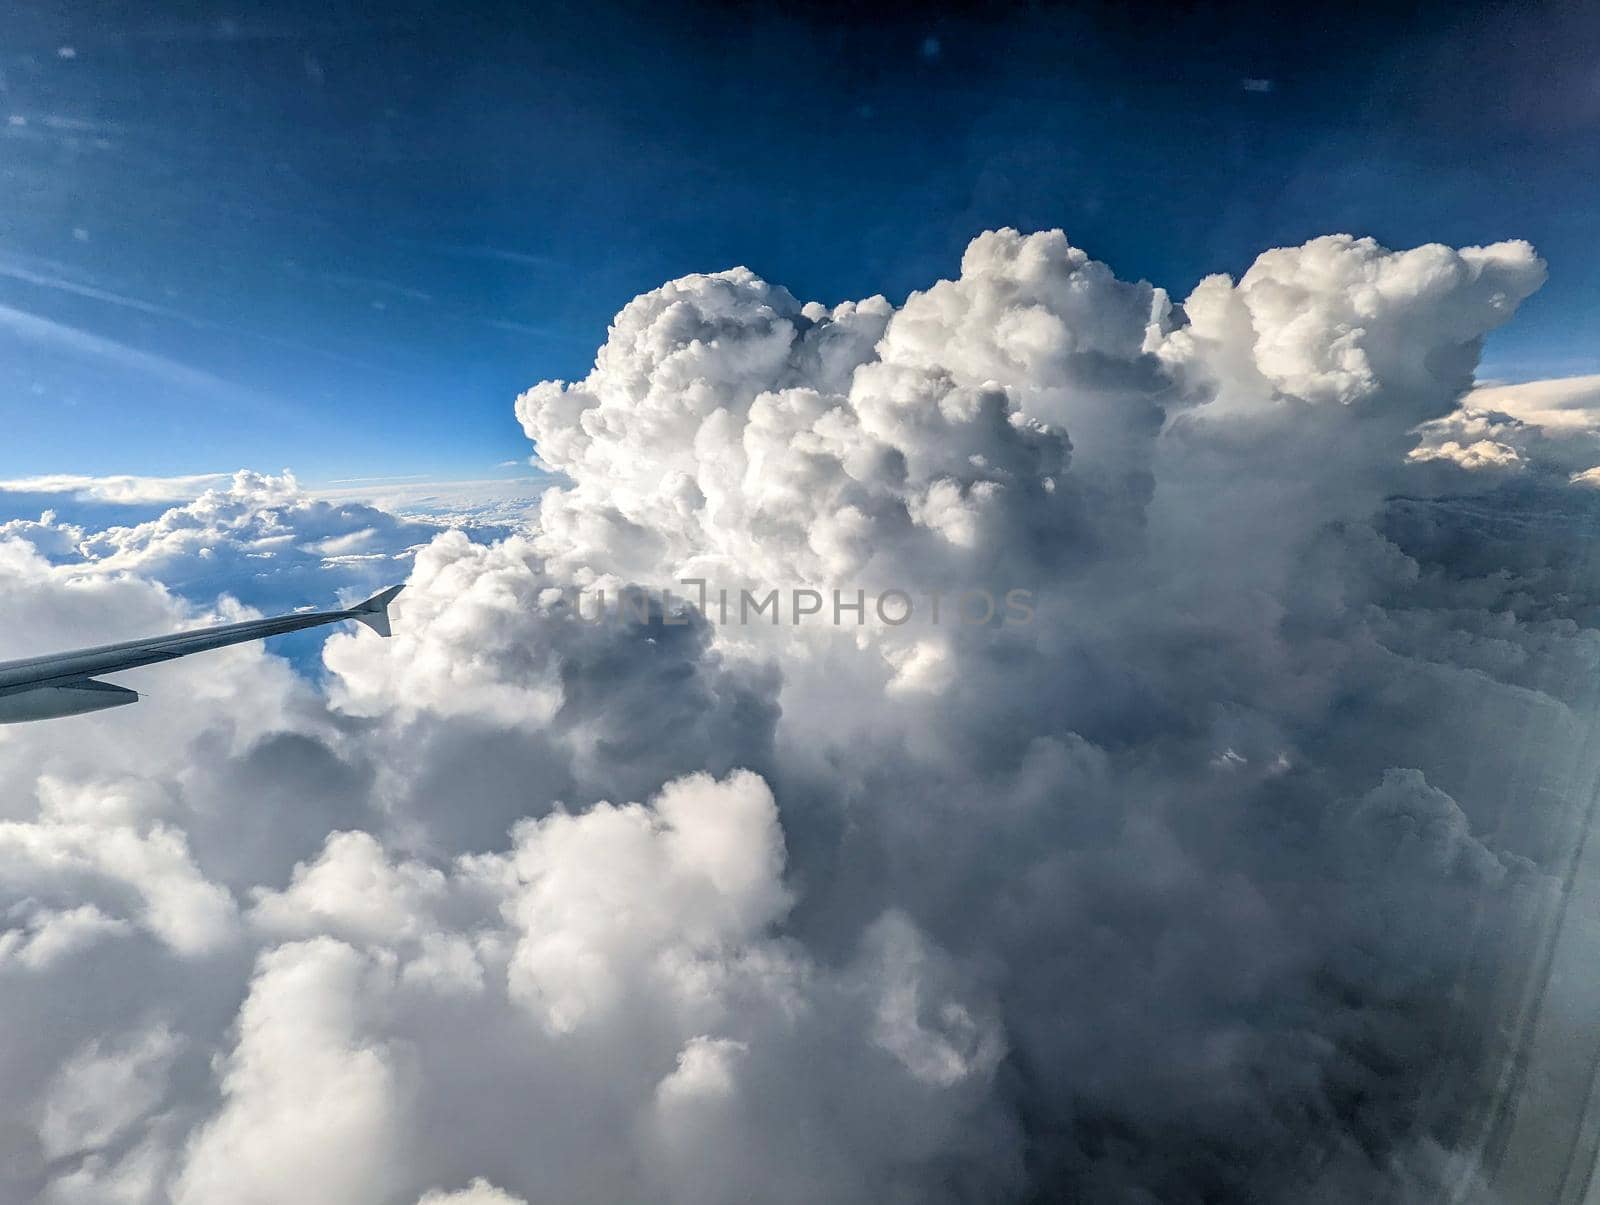 flying high in the sky with beautiful clouds by digidreamgrafix